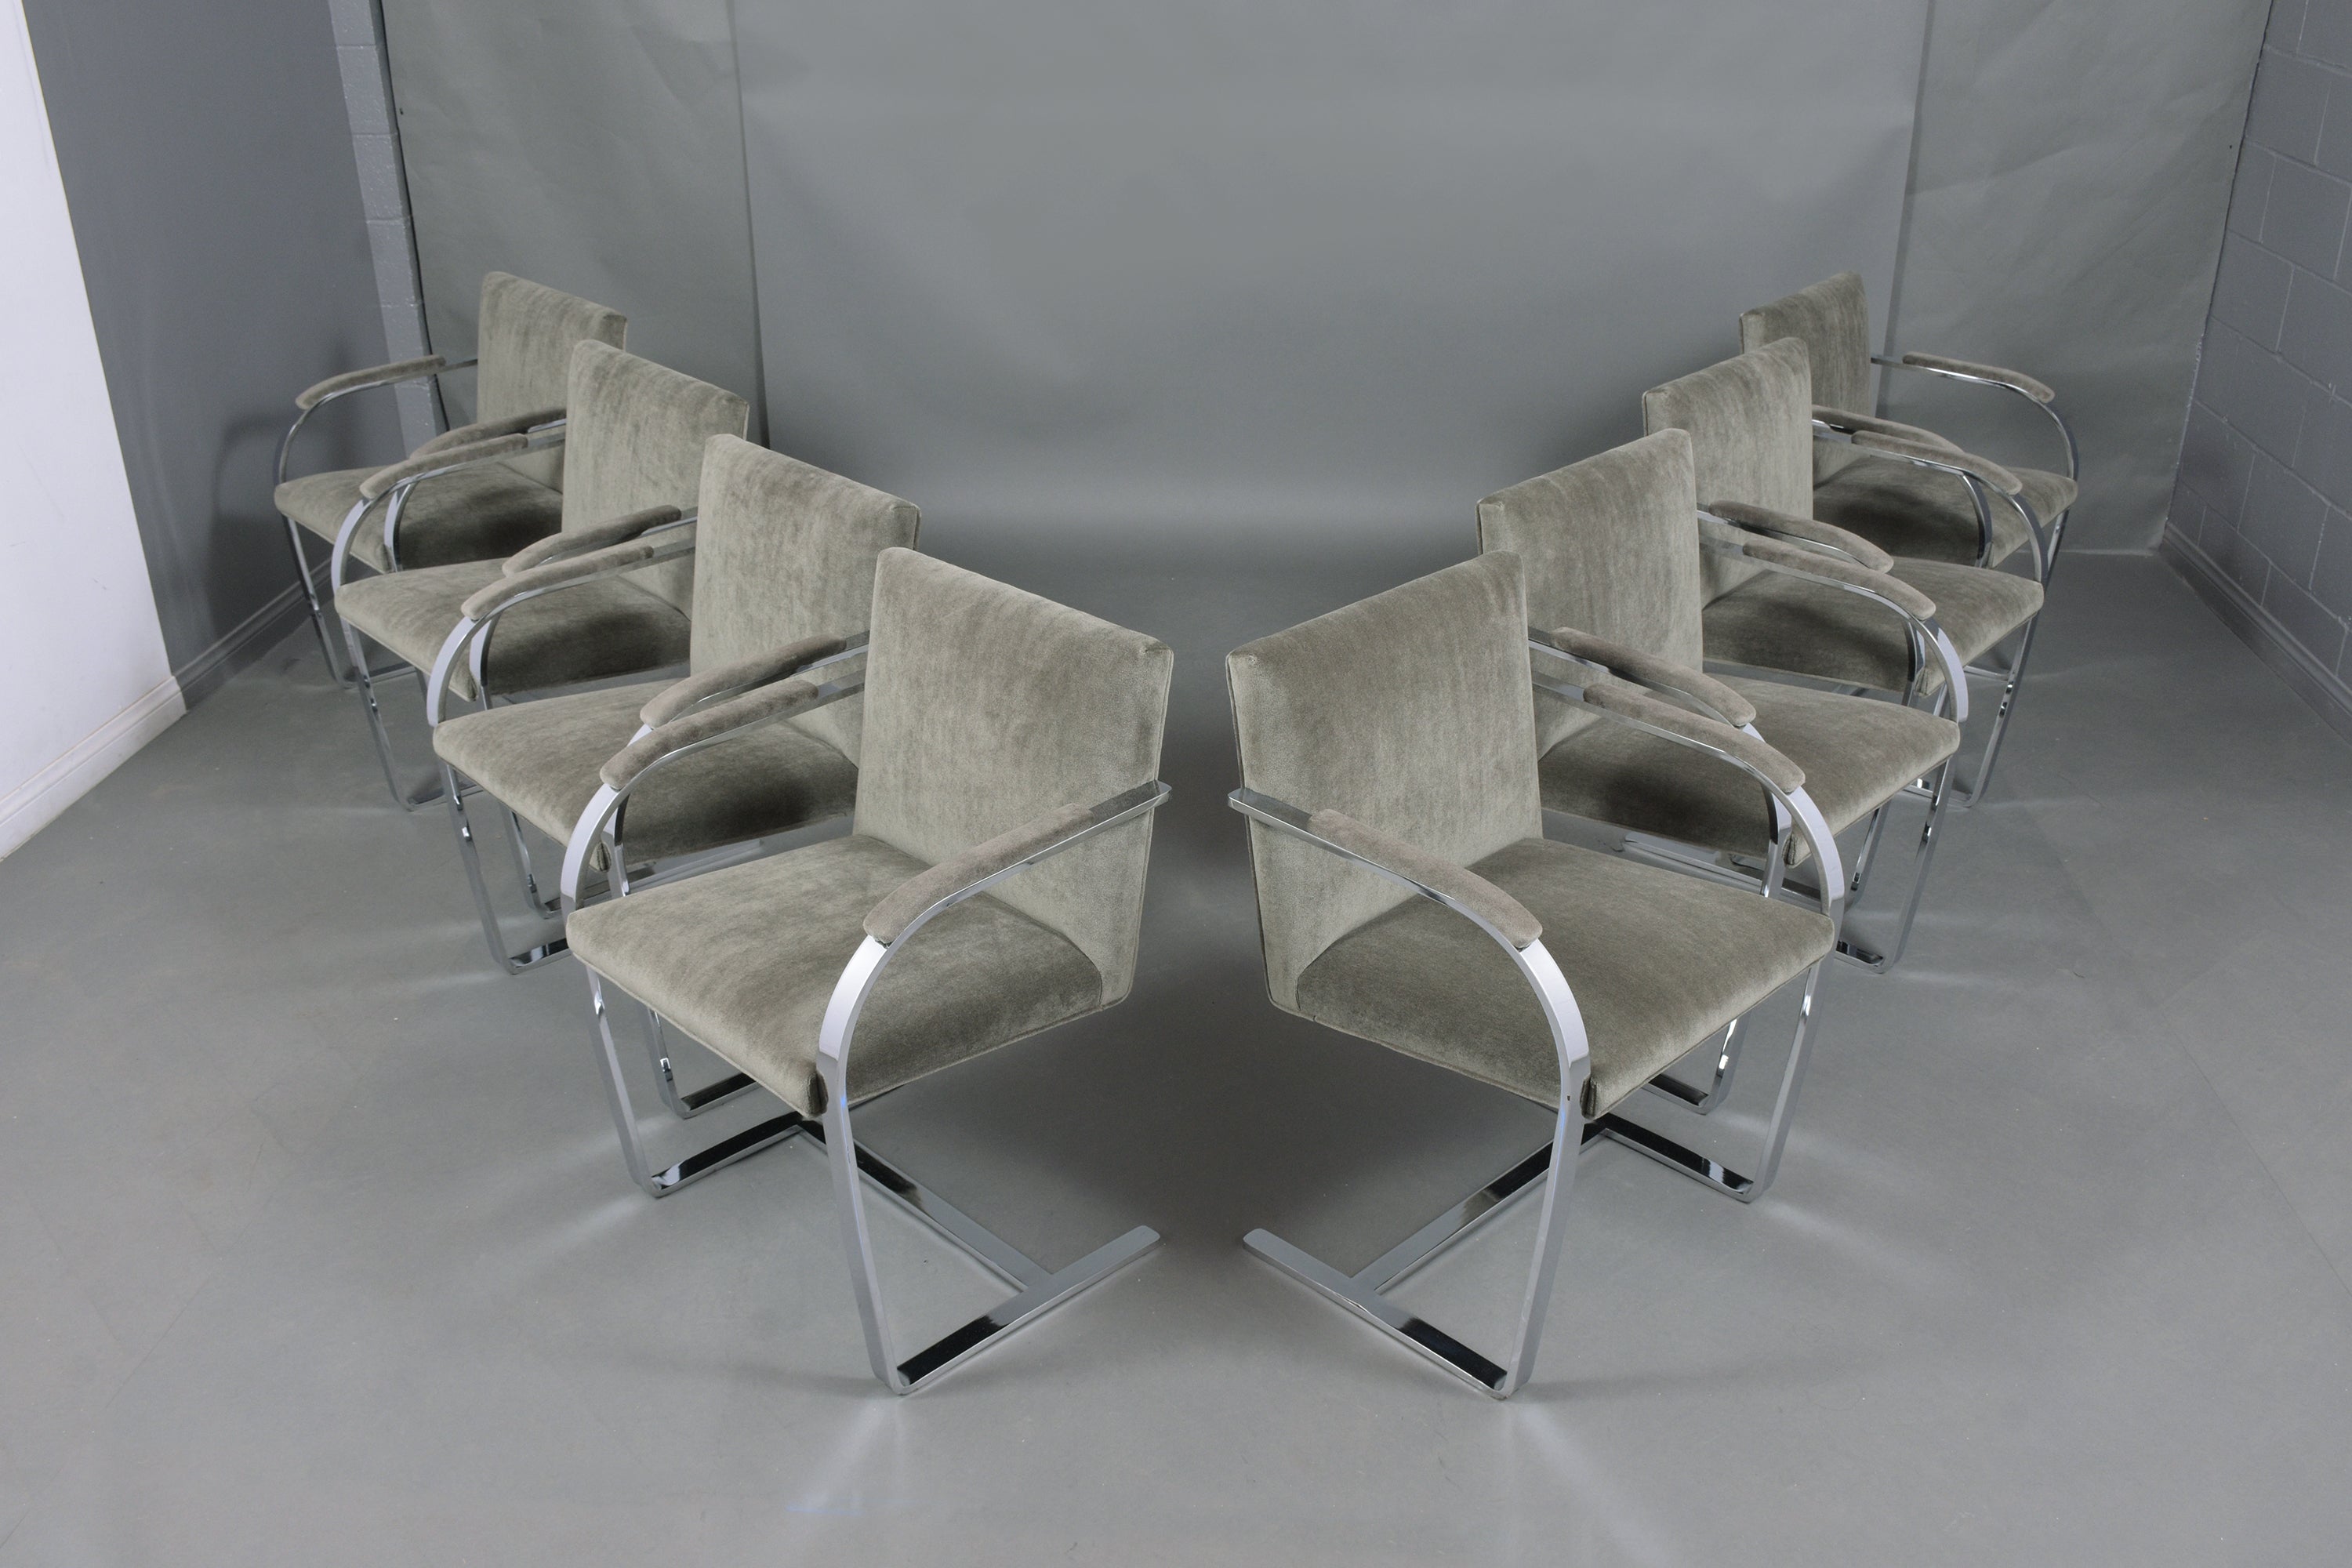 This set of eight dining chairs after Mies Van Der Rohe flat bar Brno chairs by Knoll is in good condition and has been newly upholstered by our team of expert craftsmen. The chairs have a sturdy steel frame that has been polished/buffed and is